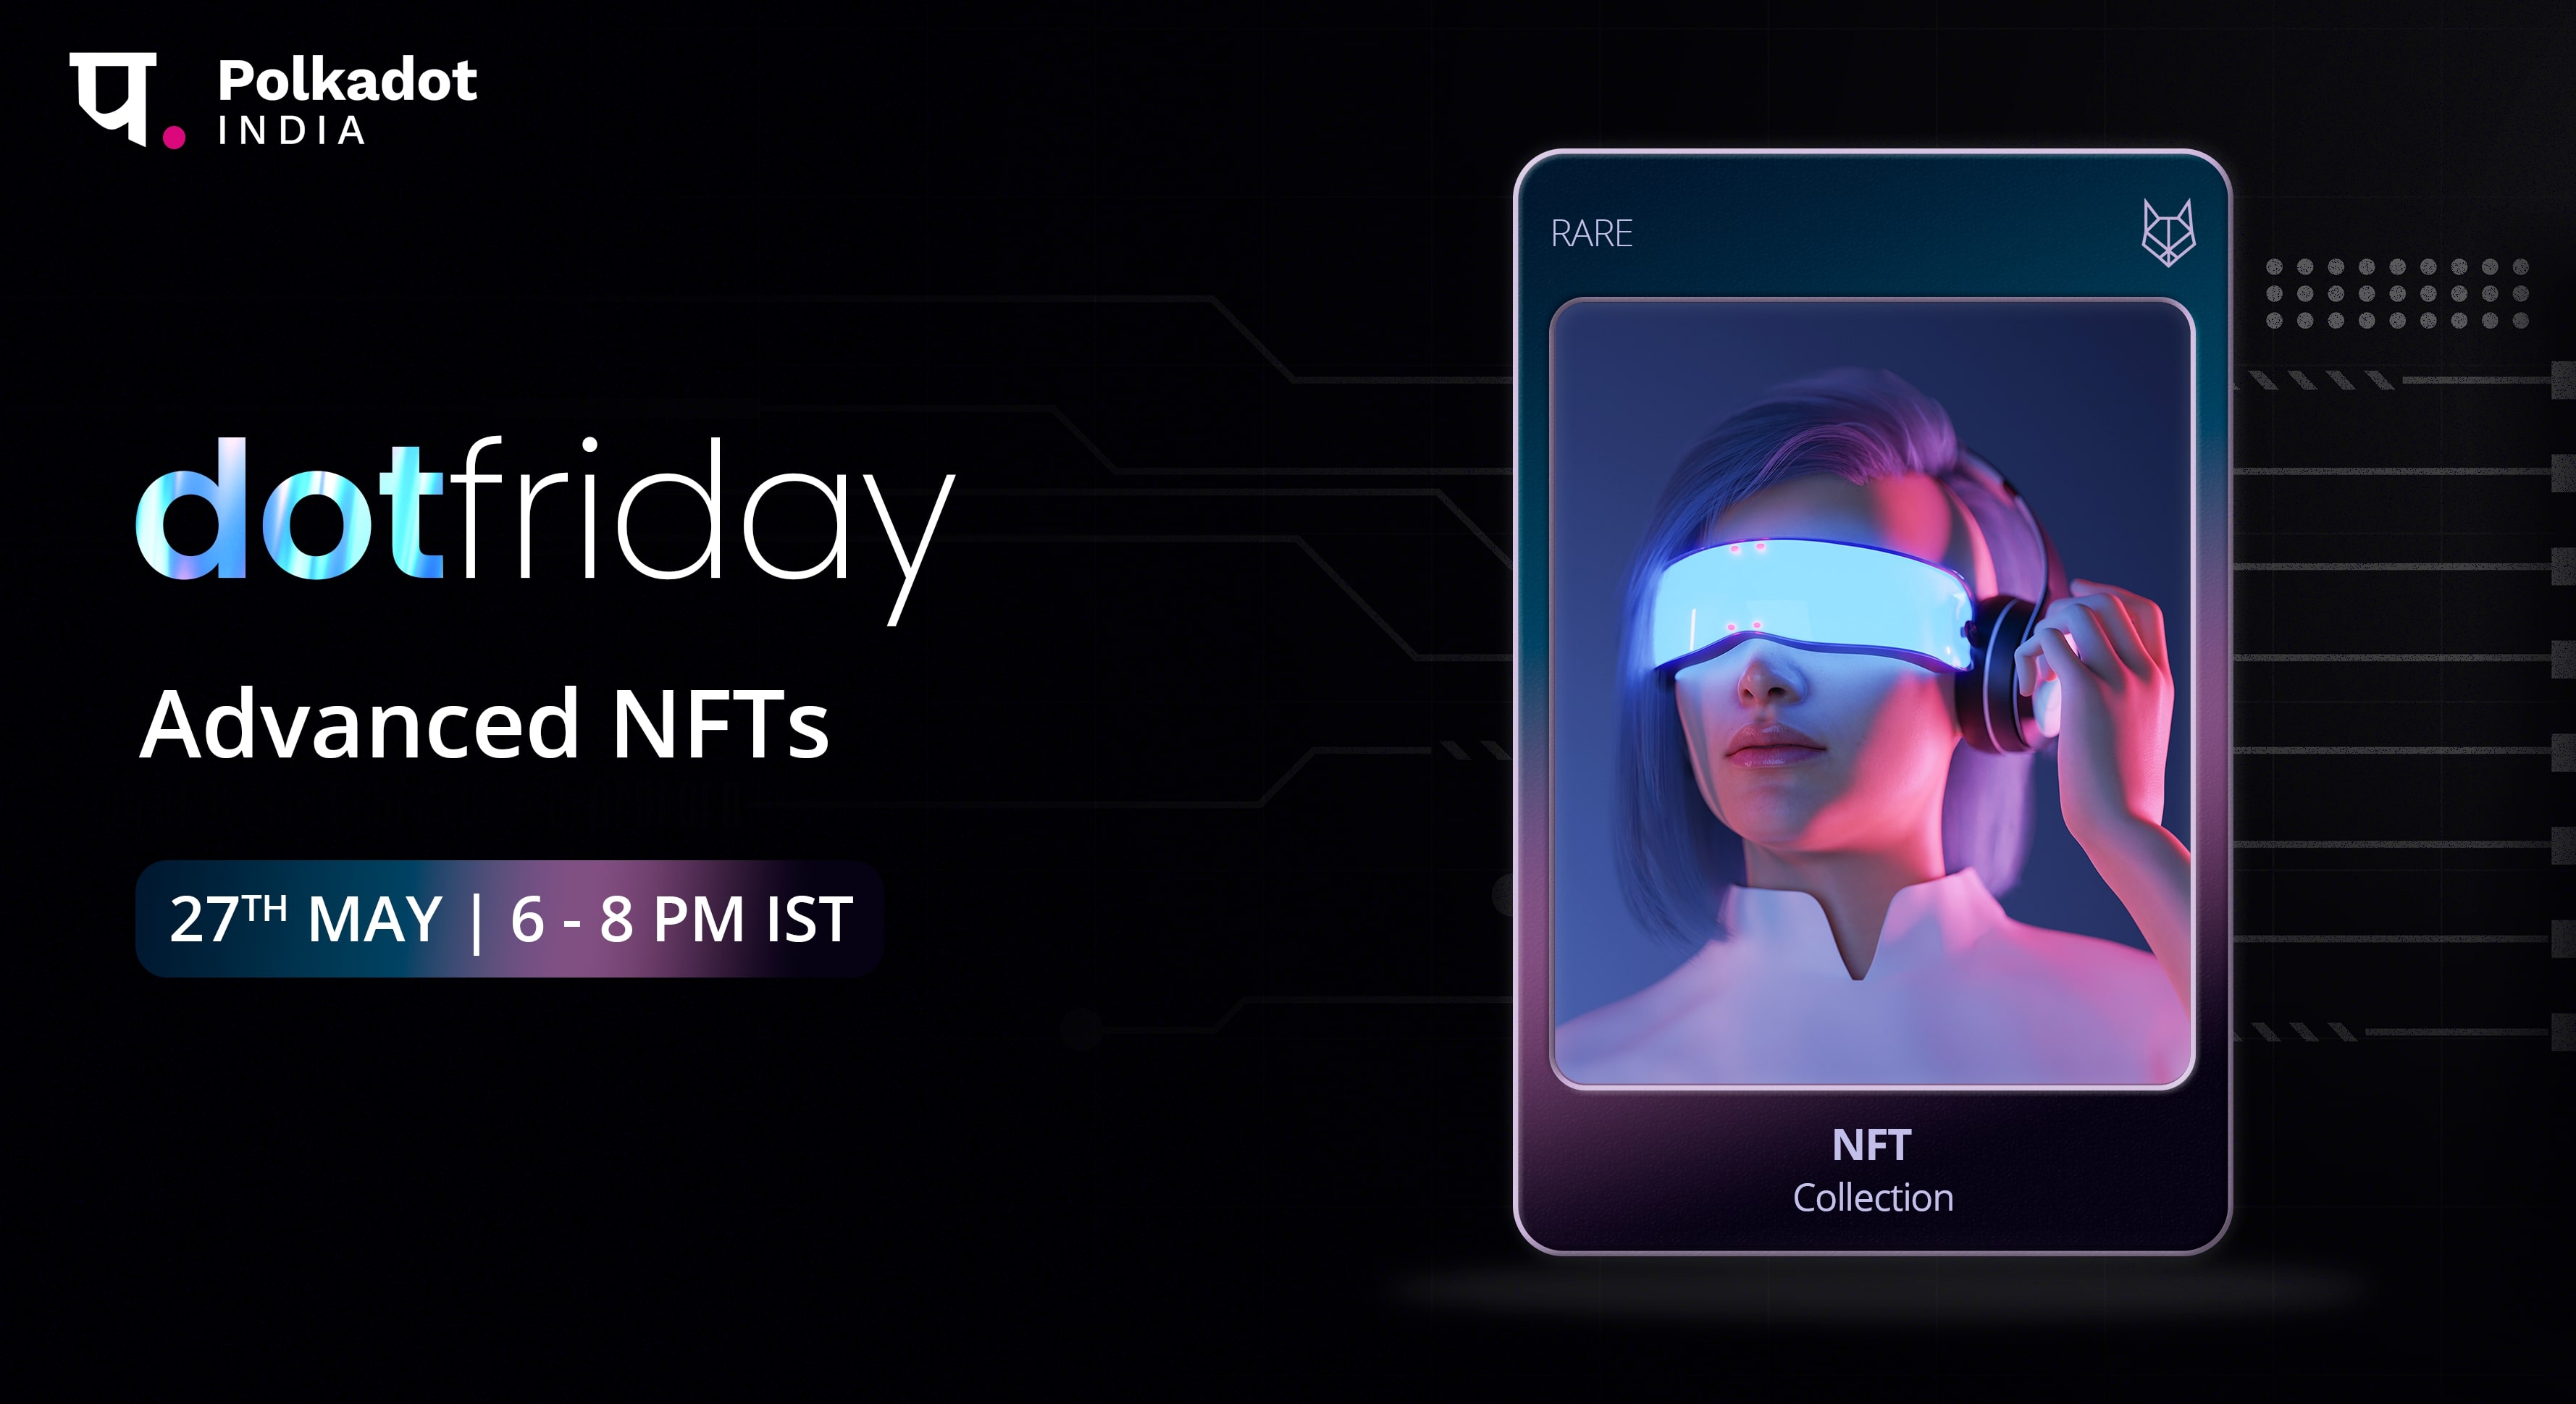 DotFriday by Polkadot India - Advanced NFTs, Online Event